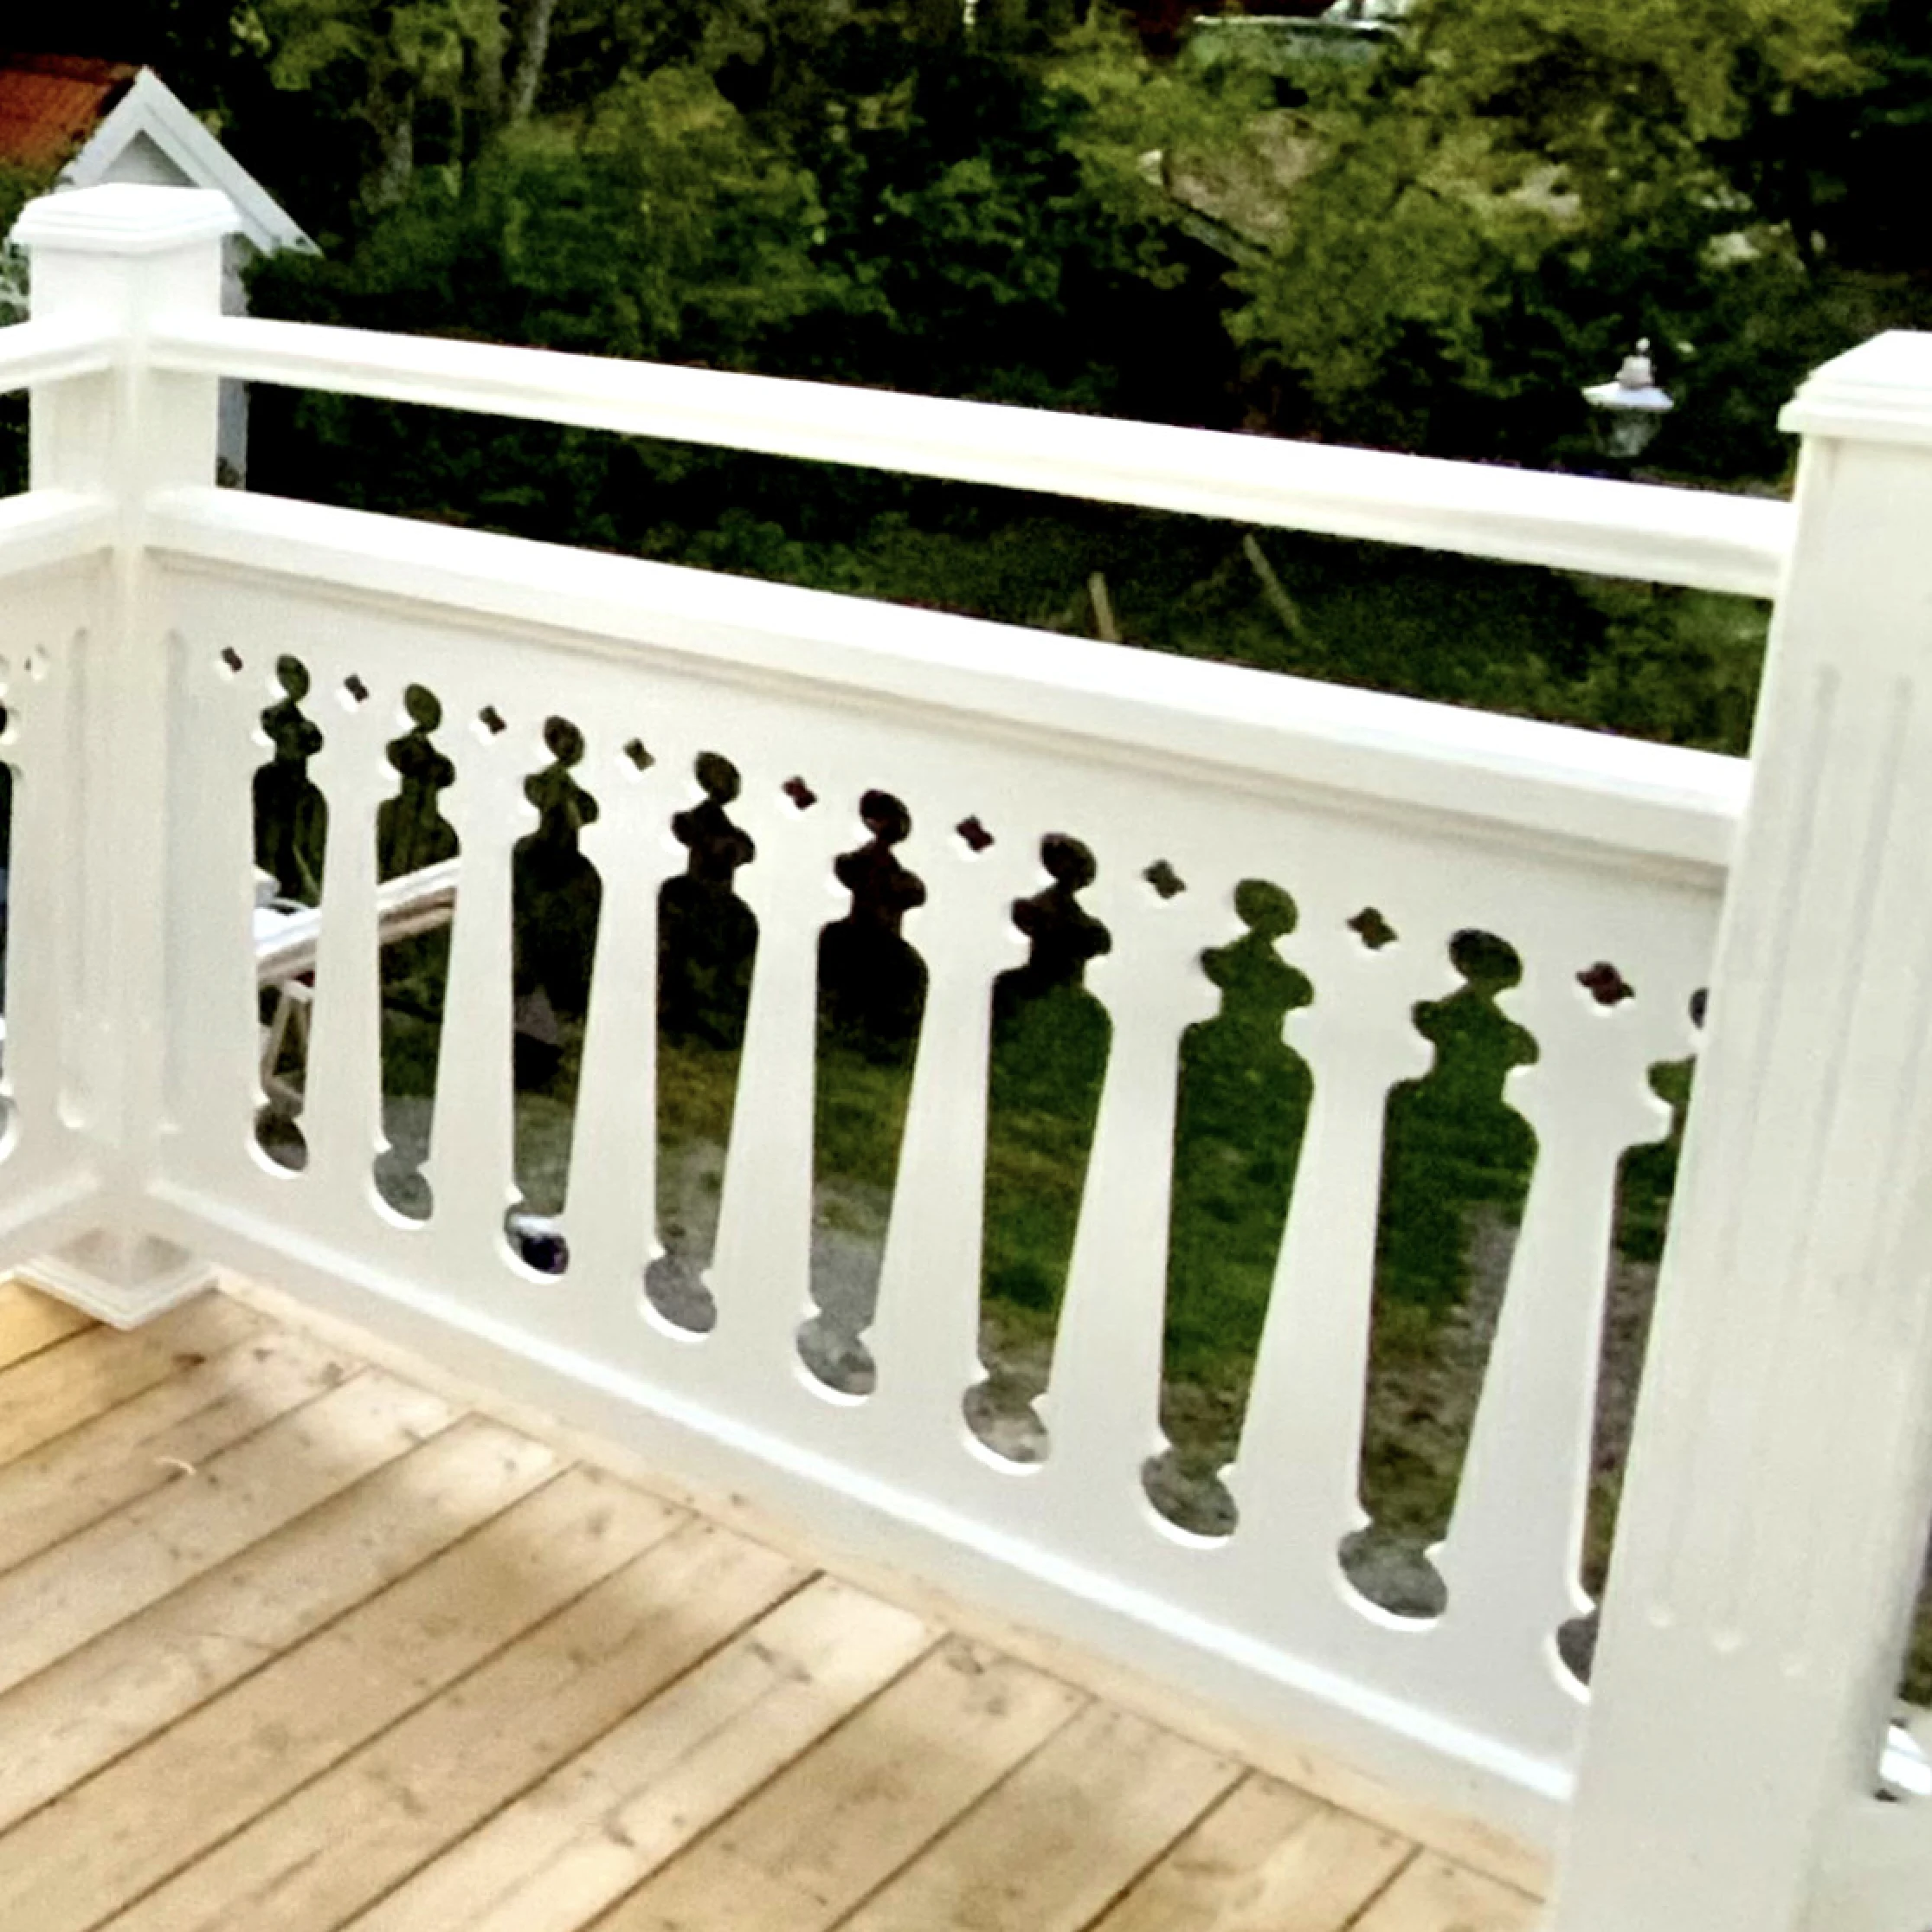 Inspiration for how to assemble and build a Swedish wooden fence with double handrails in an old-fashioned and 19th-century style, but at the same time beautiful and secure - Gaveldekor - House decoration for porch, bridge porch, and entry porch.